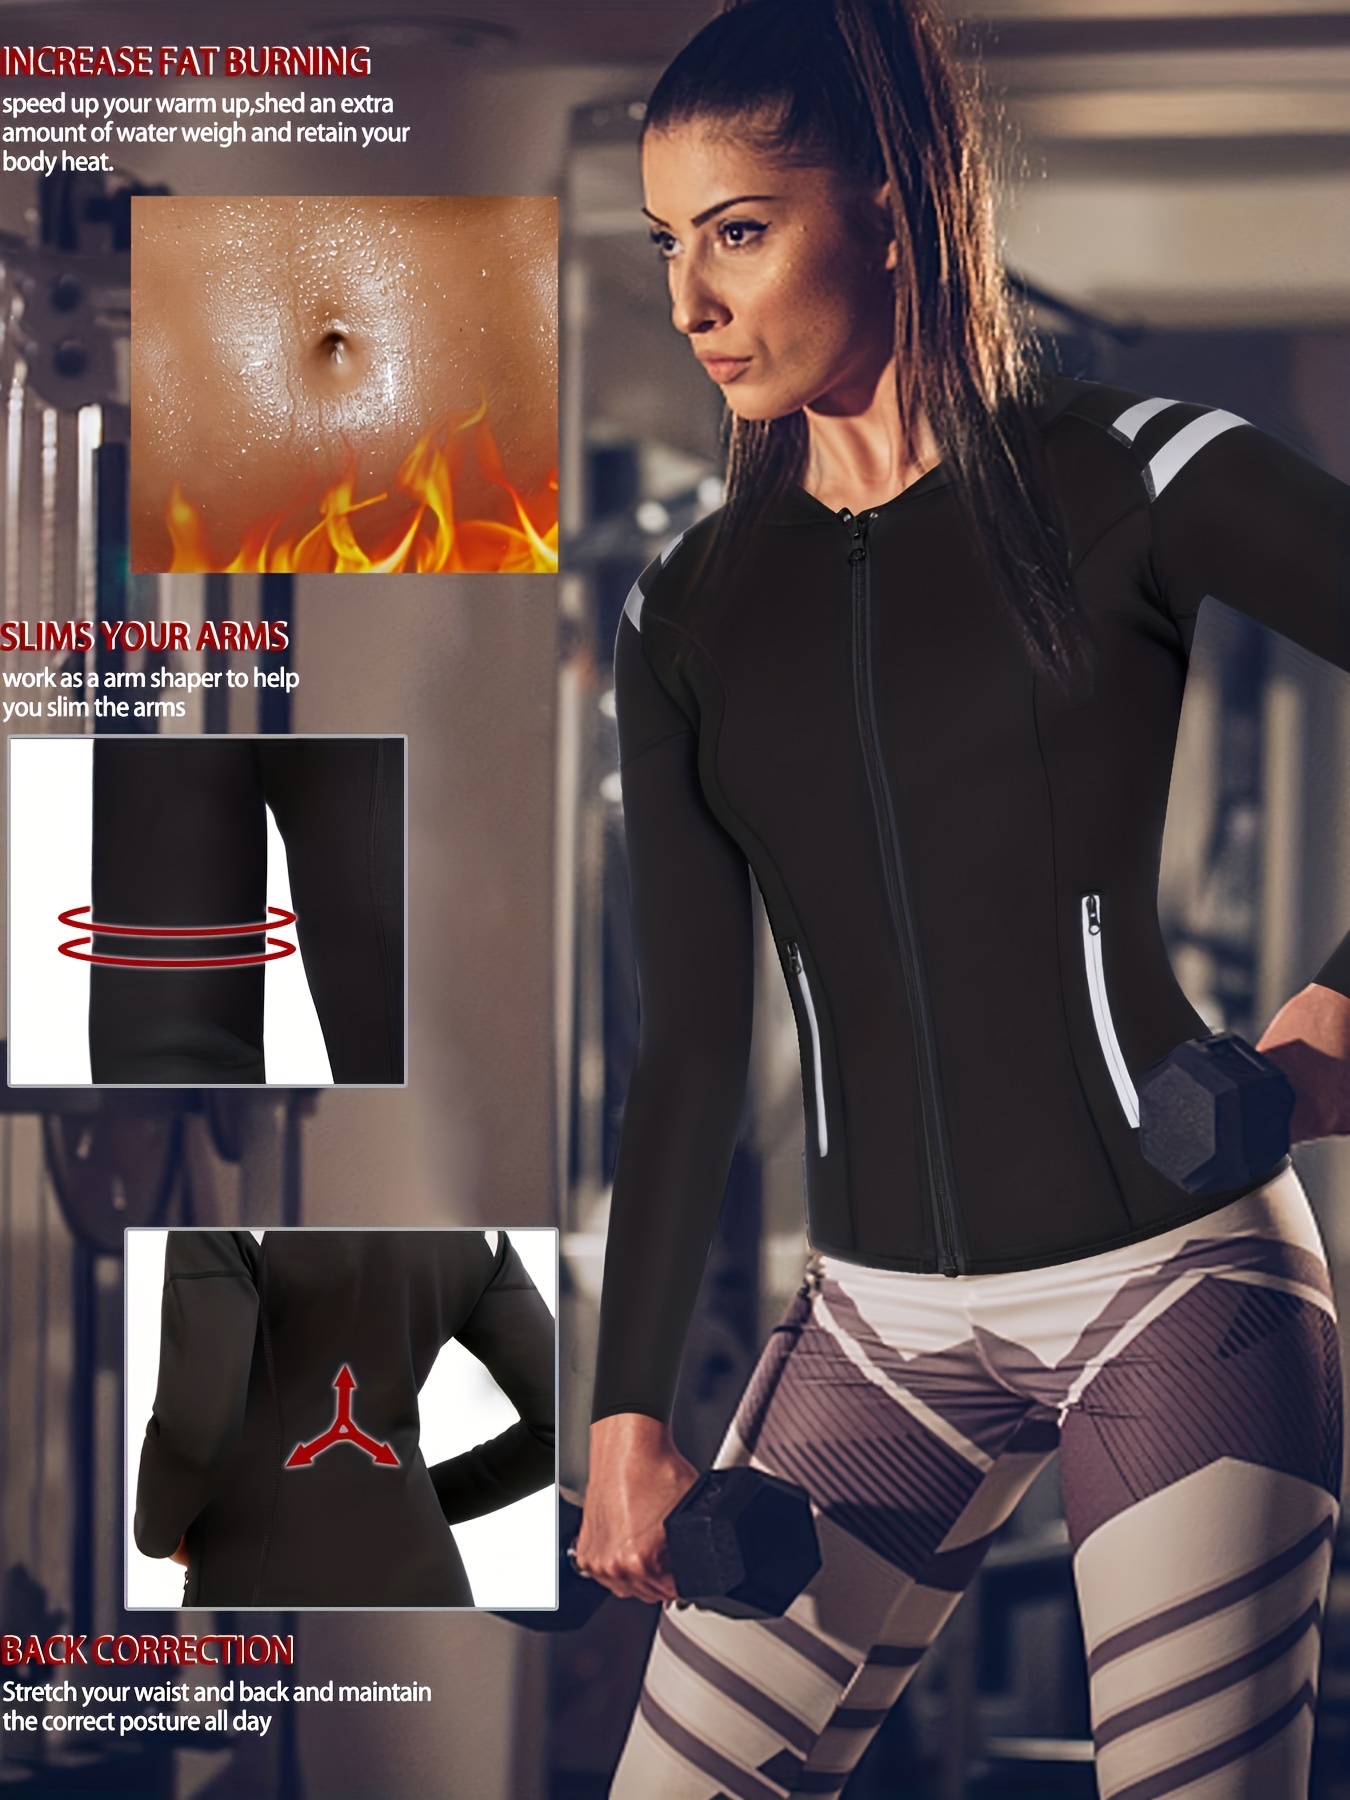 Sauna Suit For Women- Do They Work? FAQ & Everything You Need To